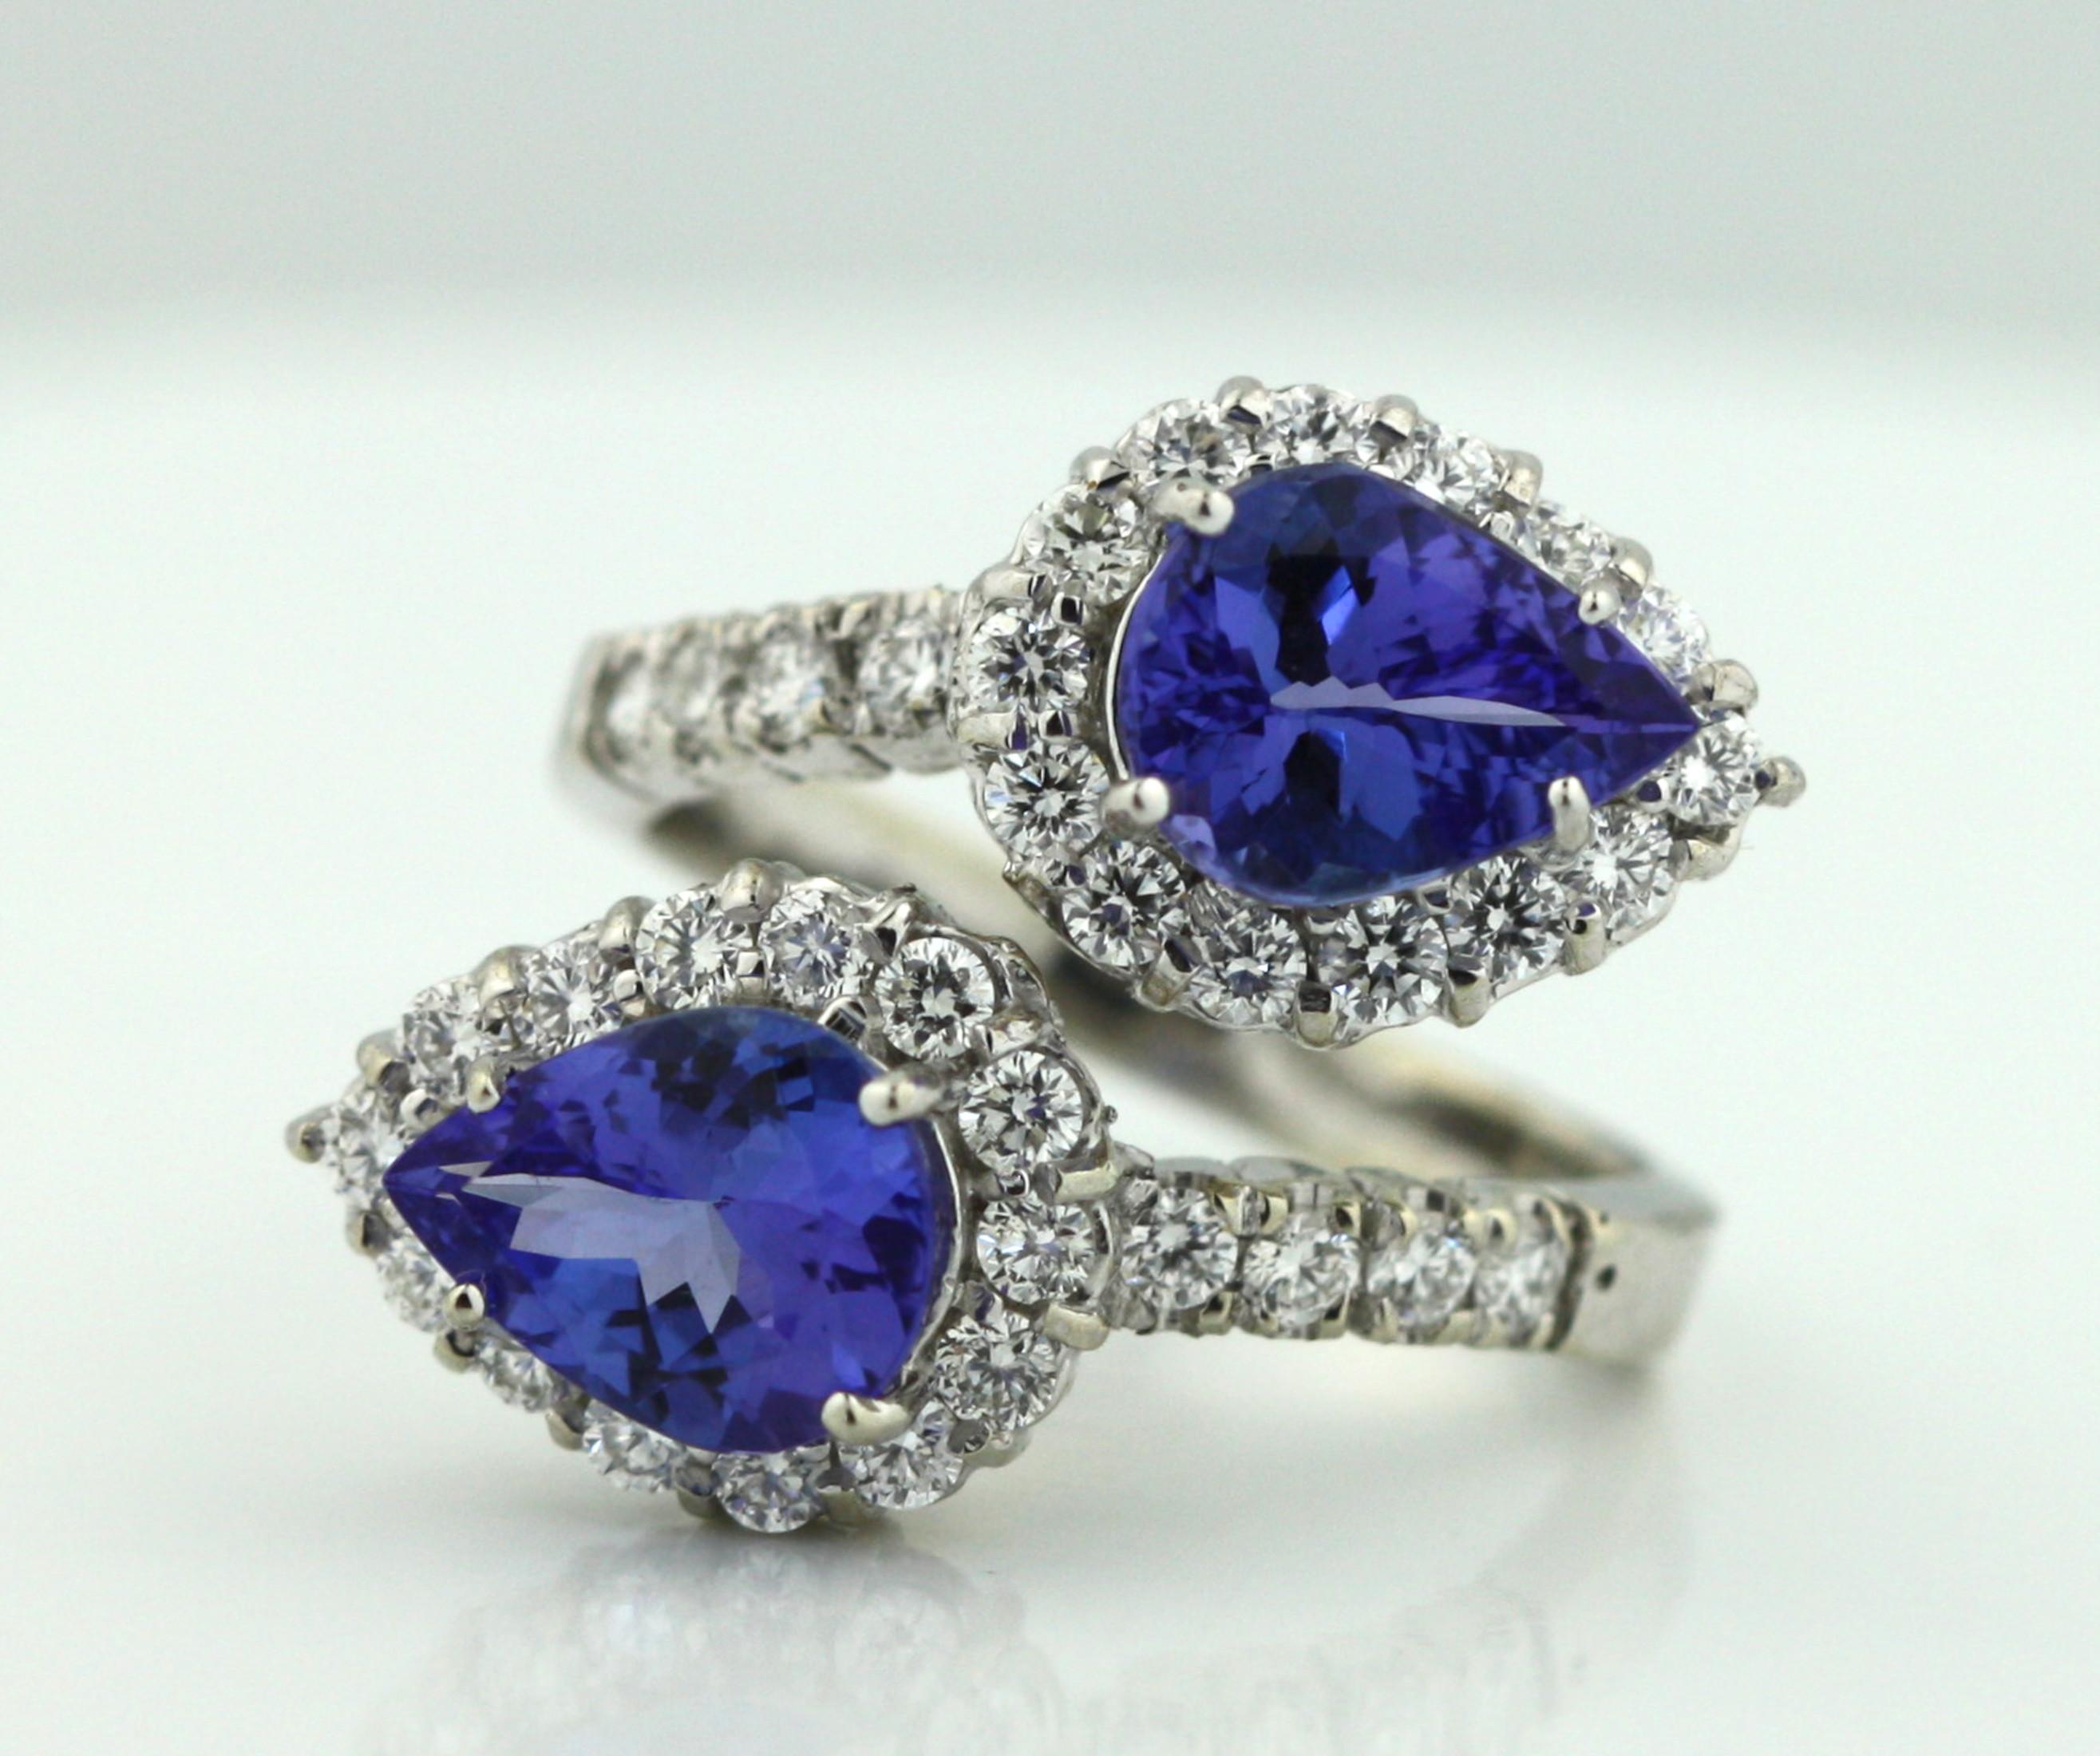 
14K Gold and Tanzanite and Diamond Ring 
Featuring two pear-shaped Tanzanites, weighing approximately 2.98 carats, measuring approximately 9 x 7 mm within a surround of thirty-six round, brilliant-cut diamonds weighing approximately 0.96 carats